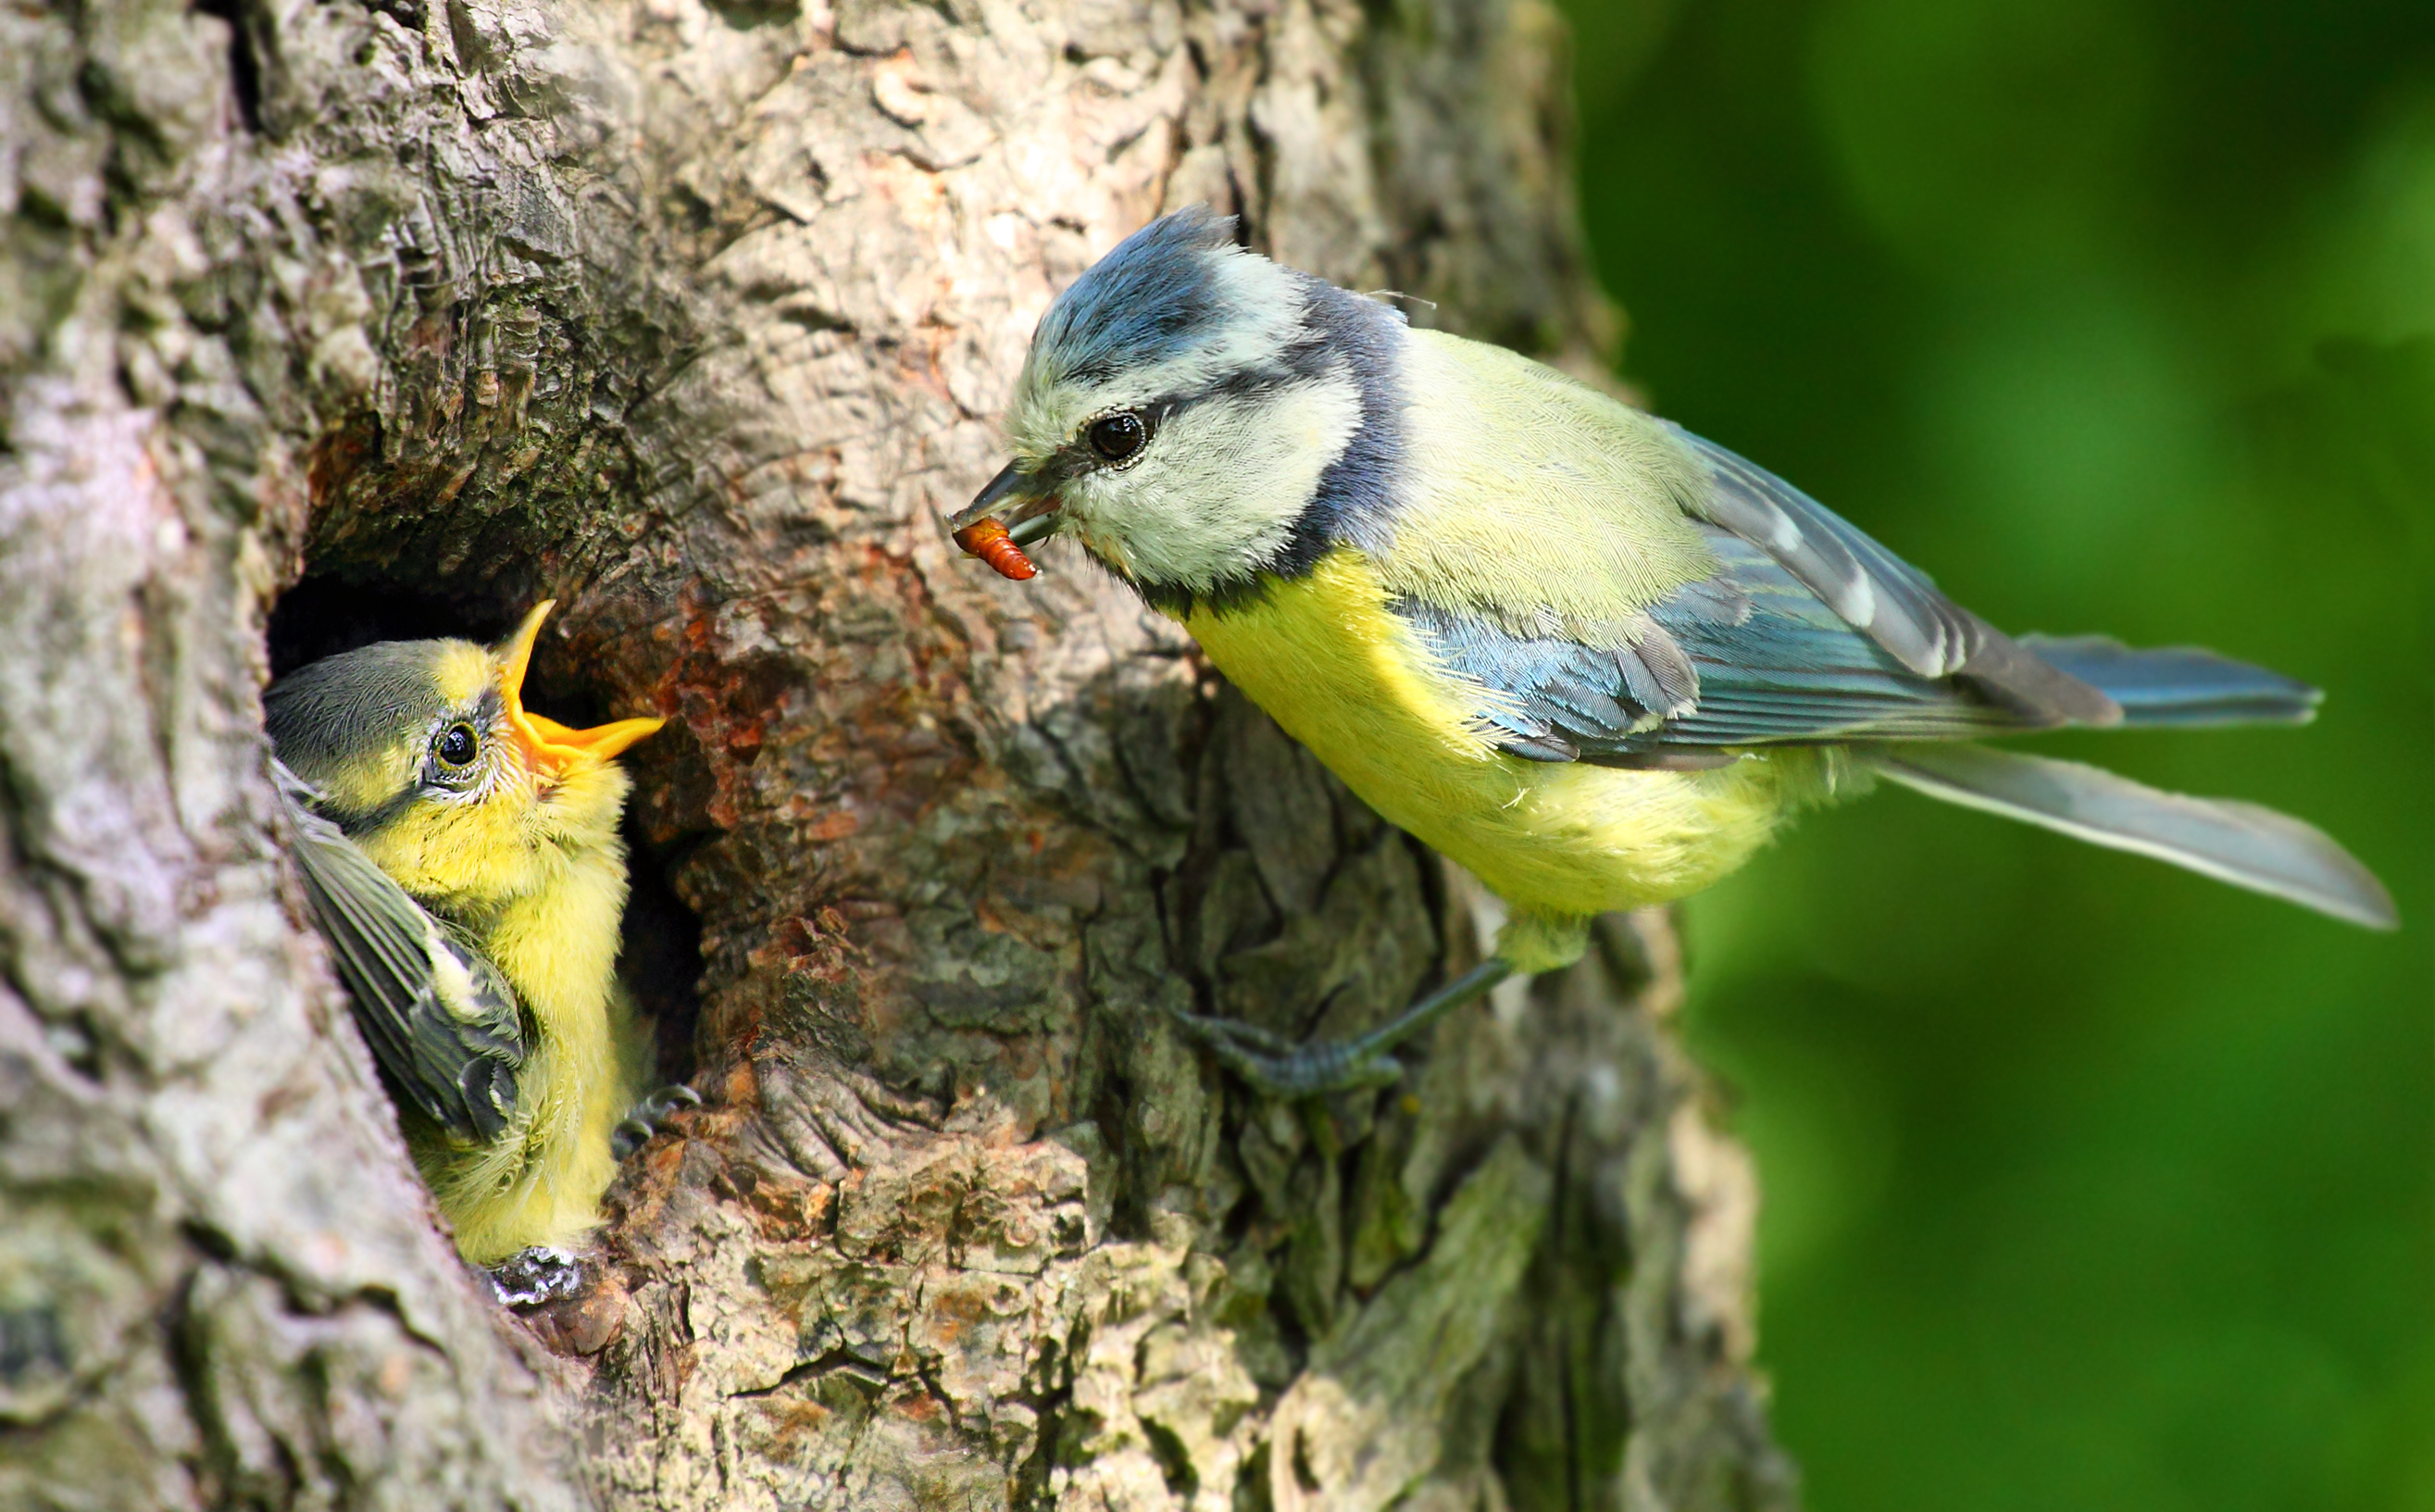 bluetit-feeding-its-baby-a-mealworm-before-it-can-eat-alone